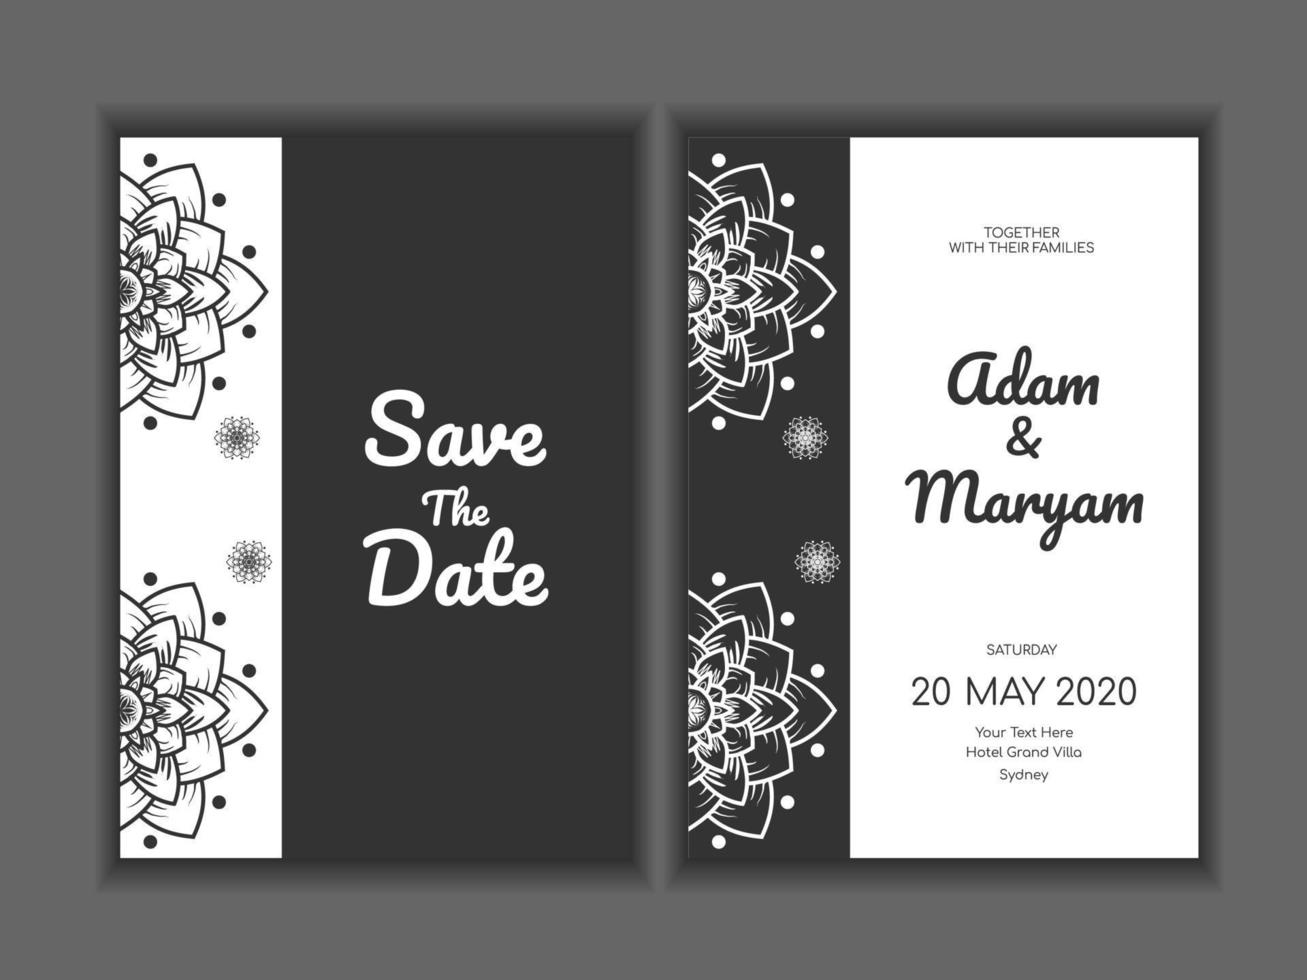 set cover content wedding invitation card with mandala, abstract frame background decoration ornament mockup greeting celebration rustic template vector illustration